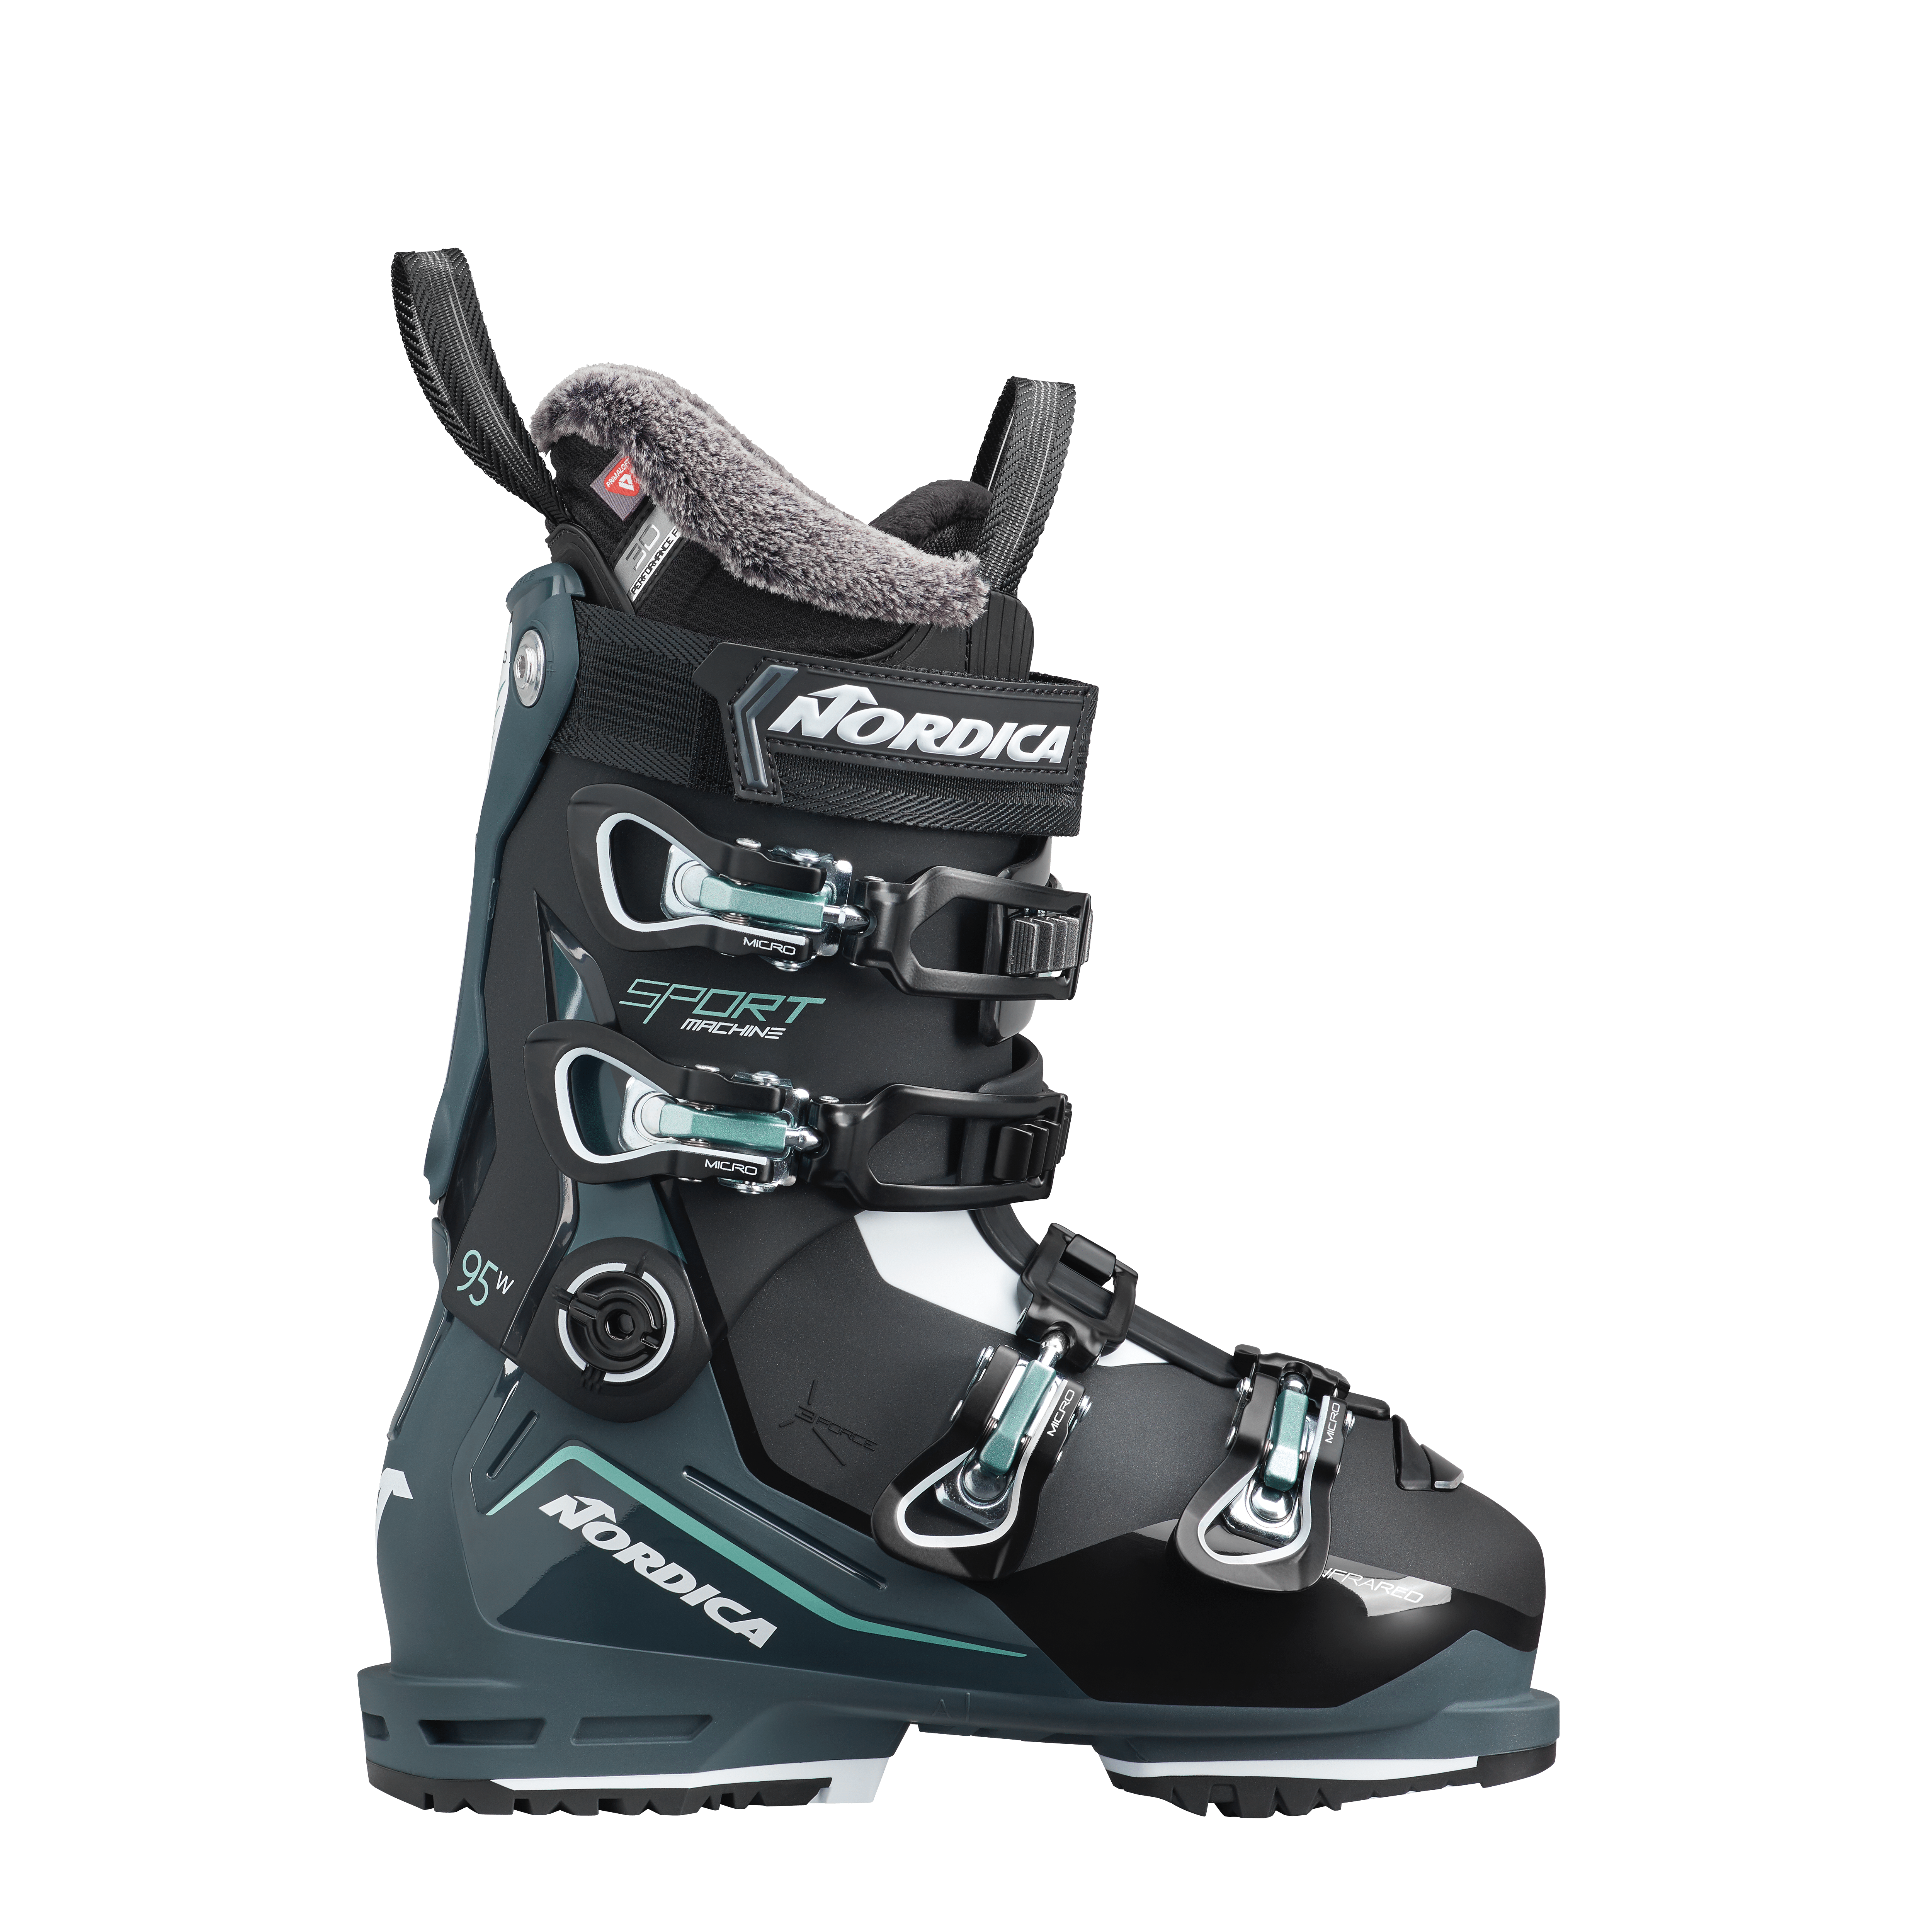 Sportmachine 3 95 W (GW) - Nordica - Skis and Boots – Official website